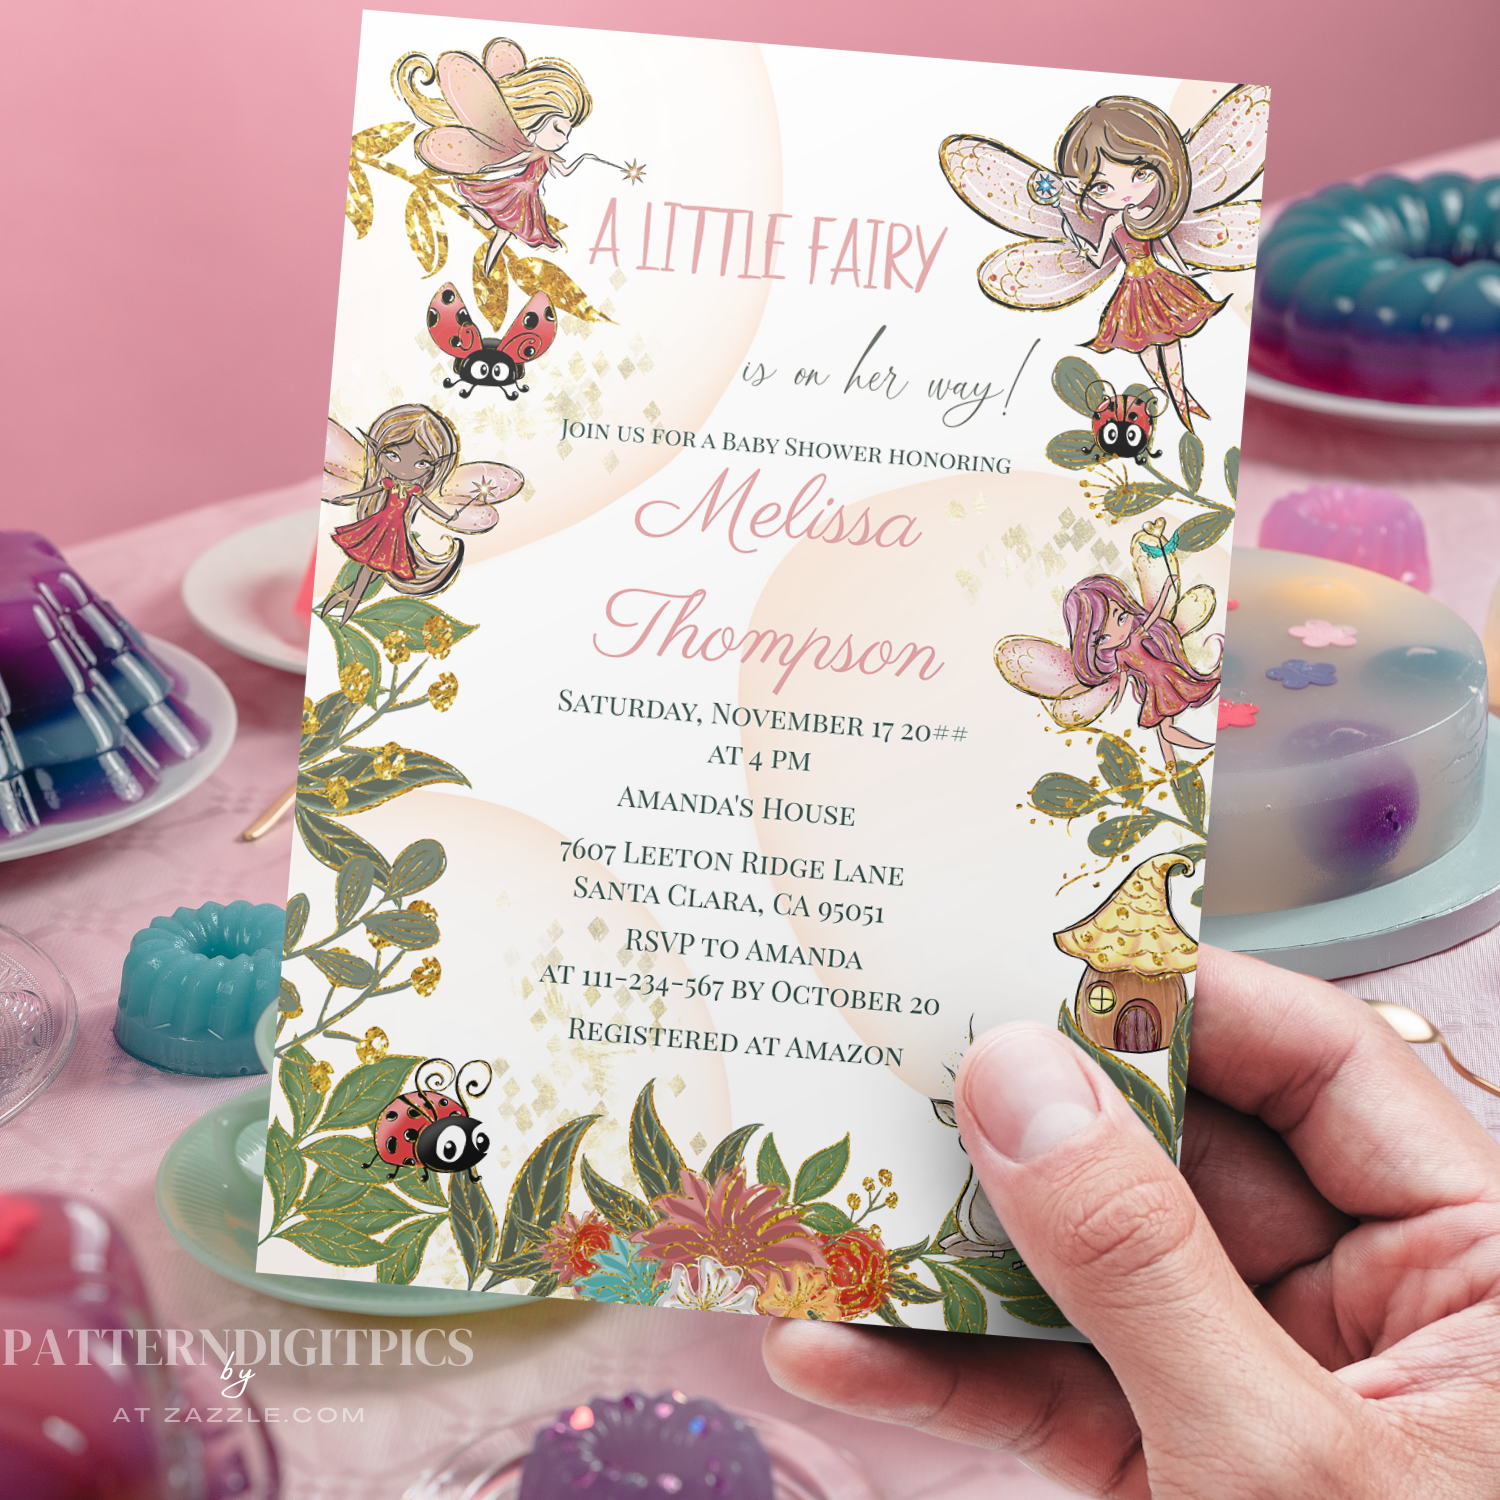 Whimsical Enchanted Forest or Garden Fairies with ladybug, floral, flowers and greenery Baby Shower Invitation